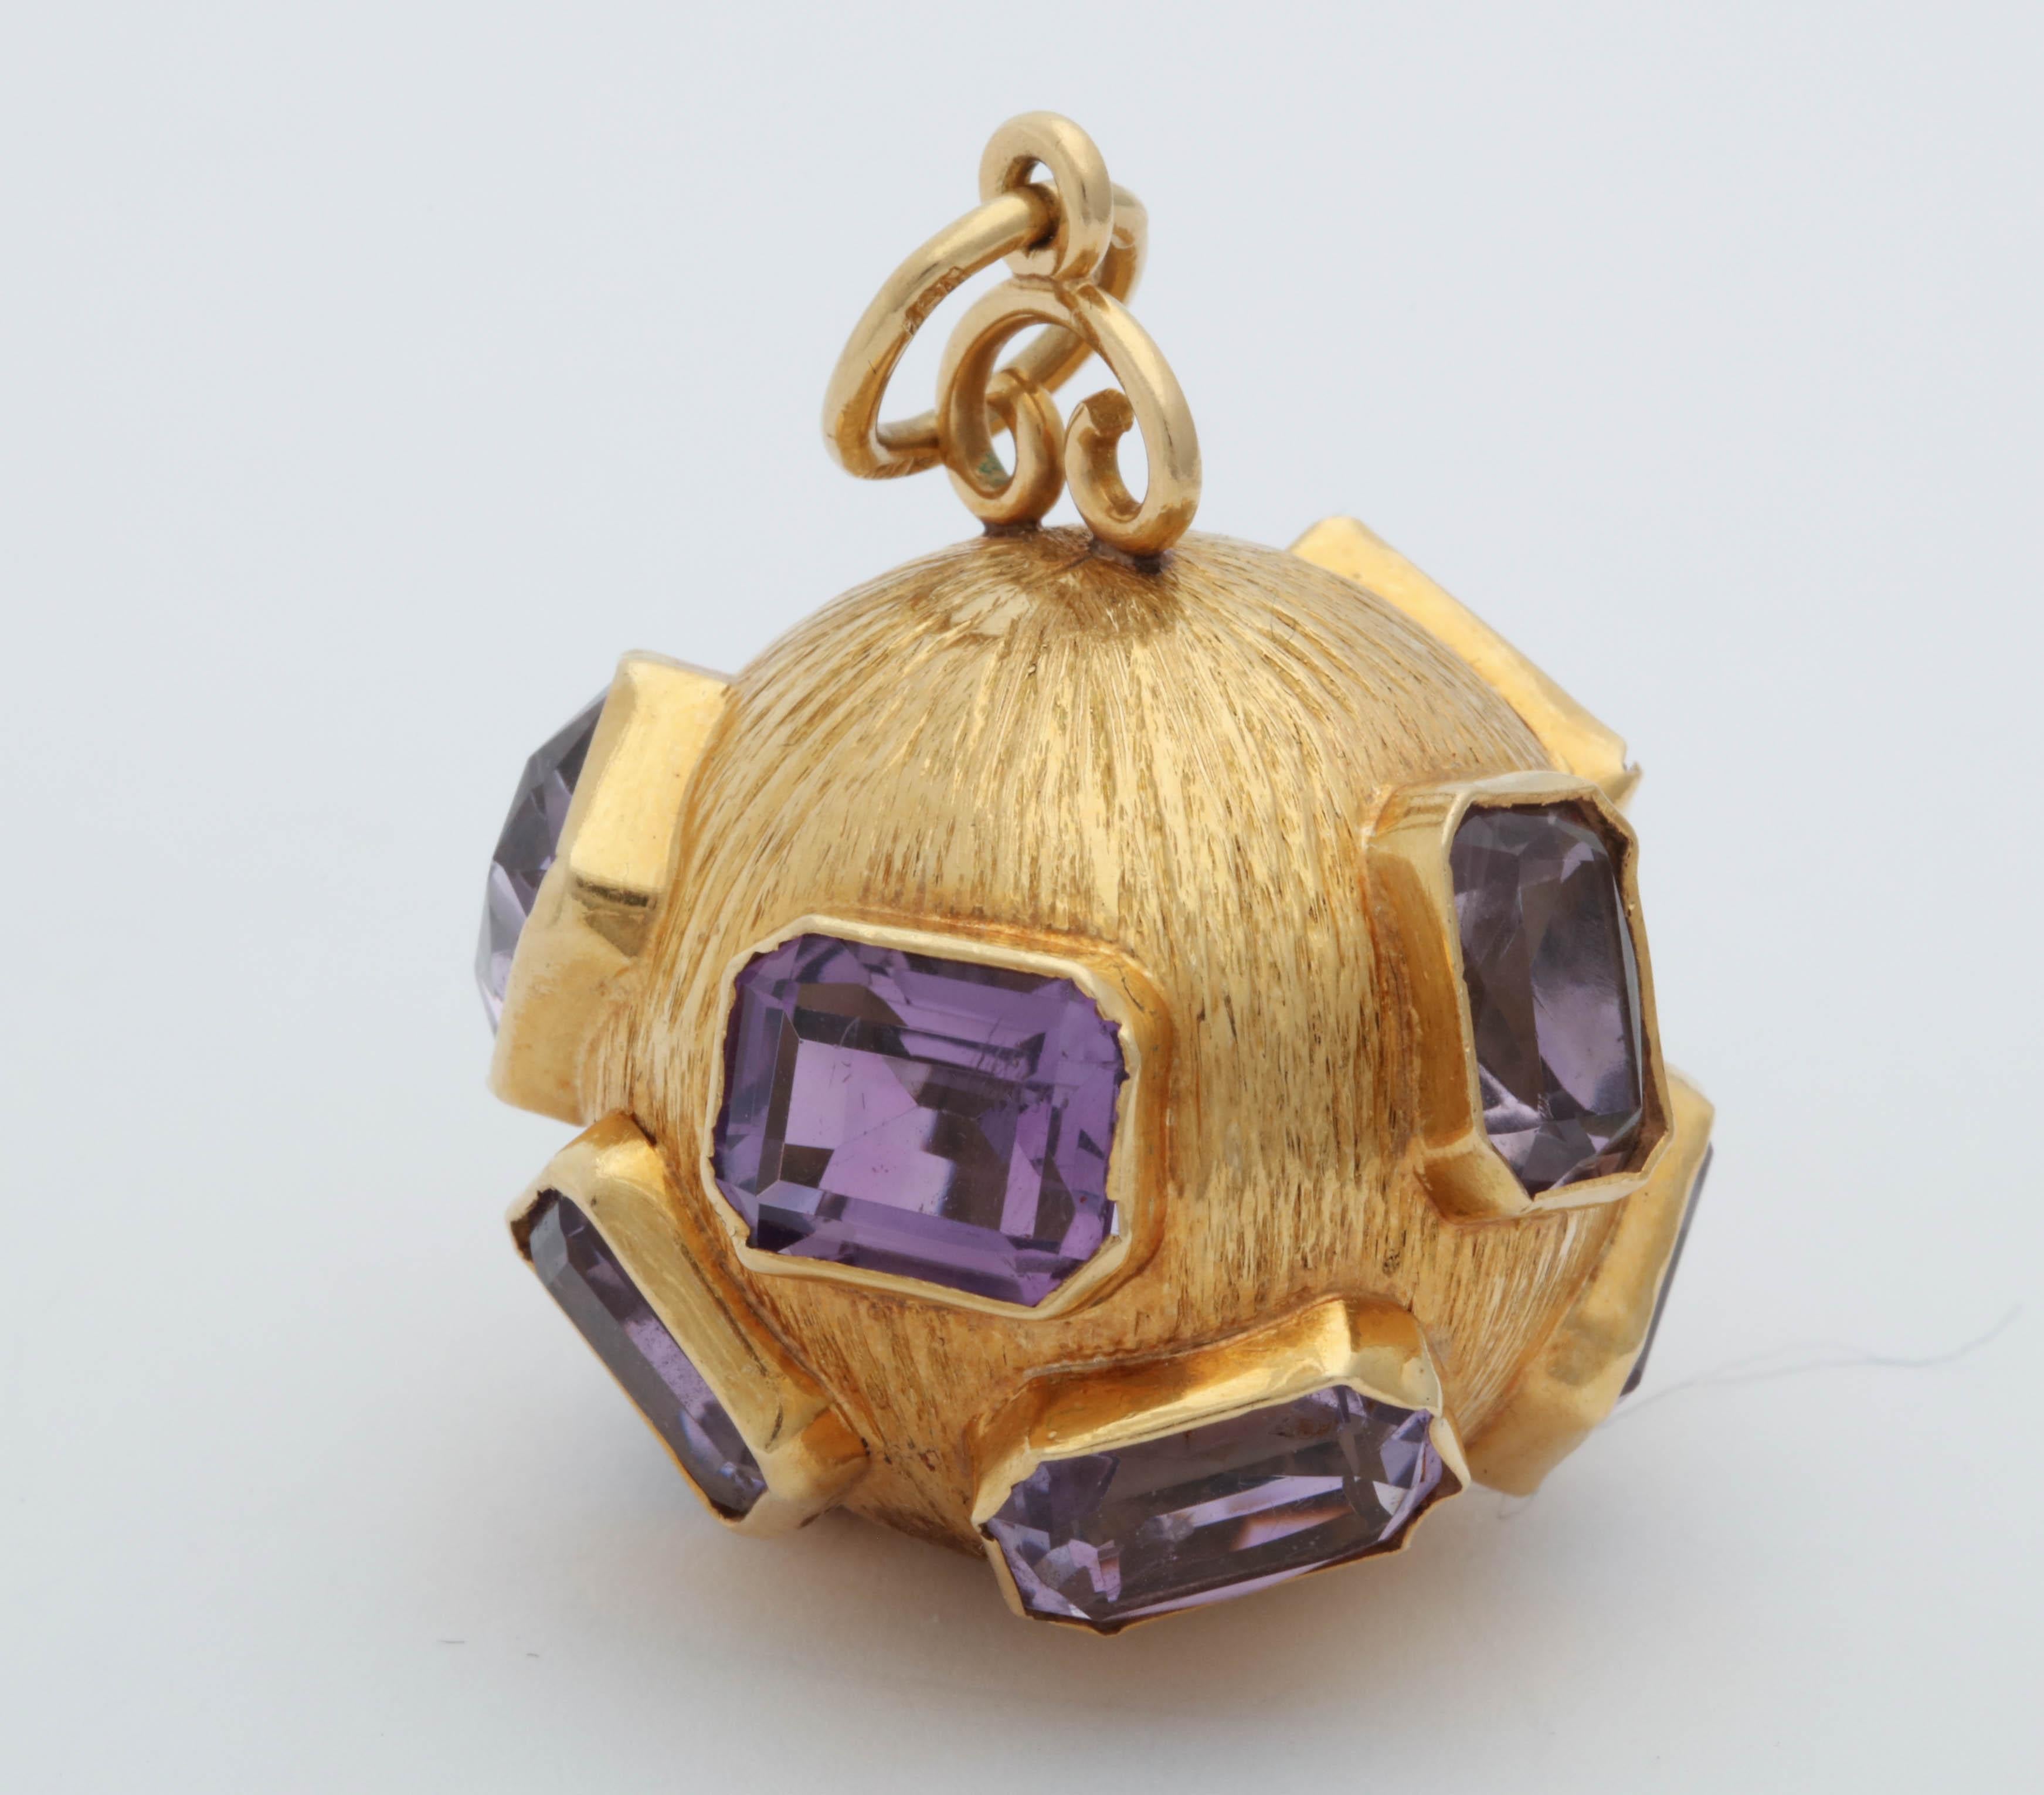 One 18kt Textured Gold Large Crater Charm Pendant Embellished With {10} Large Emerald Cut Amethyst Stones Weighing Approximately [50] Carats Total Weight. Beautiful Large 18kt Gold Bail To Hook Thru Any Chain Or Bracelet Easily.Designed In The